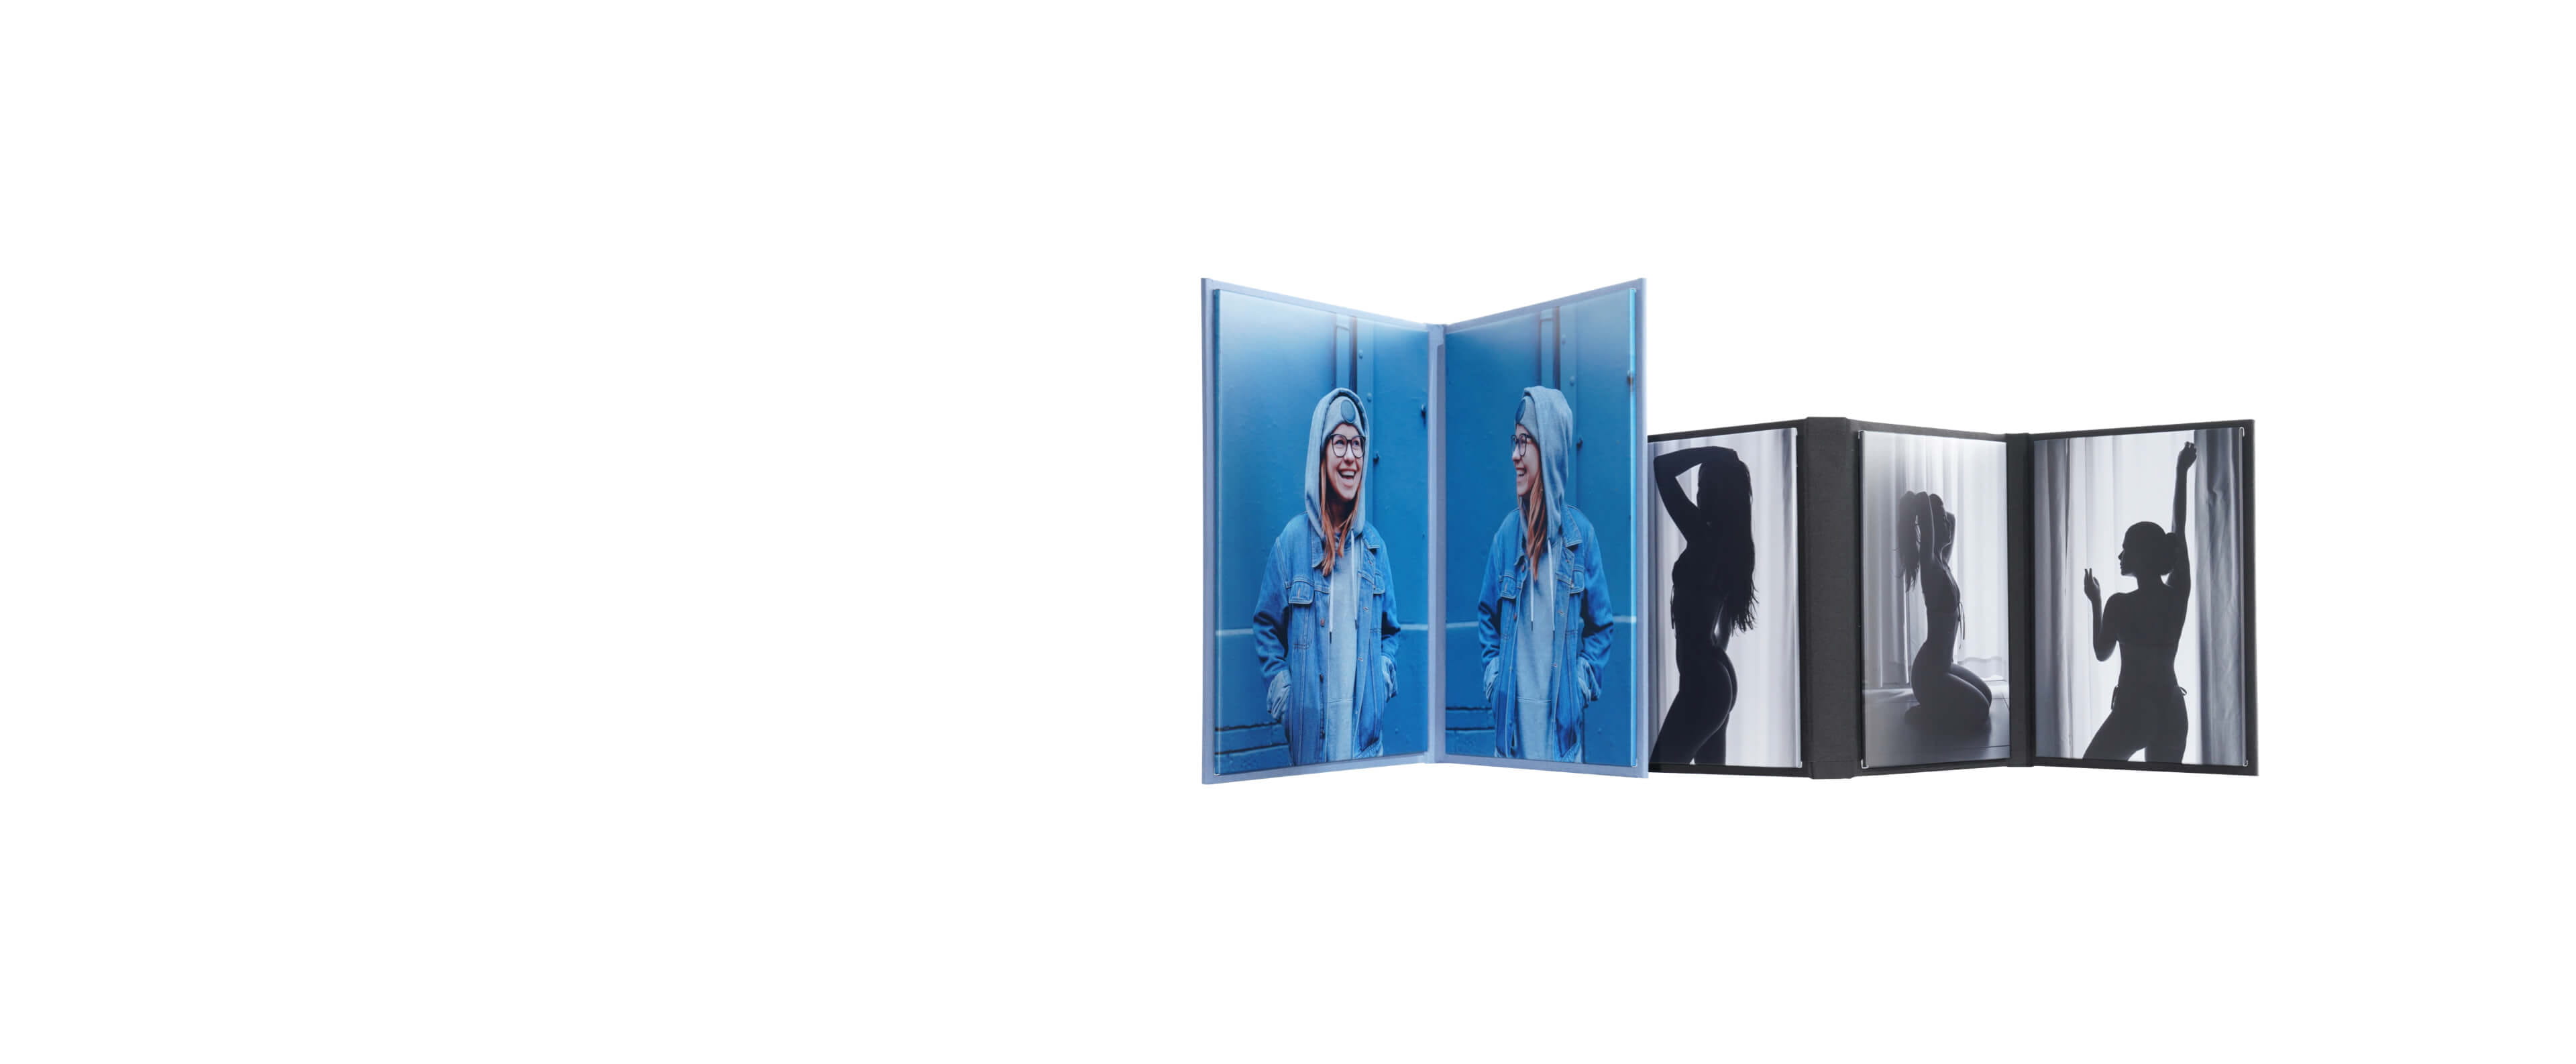 two wrapped image folios in different sizes